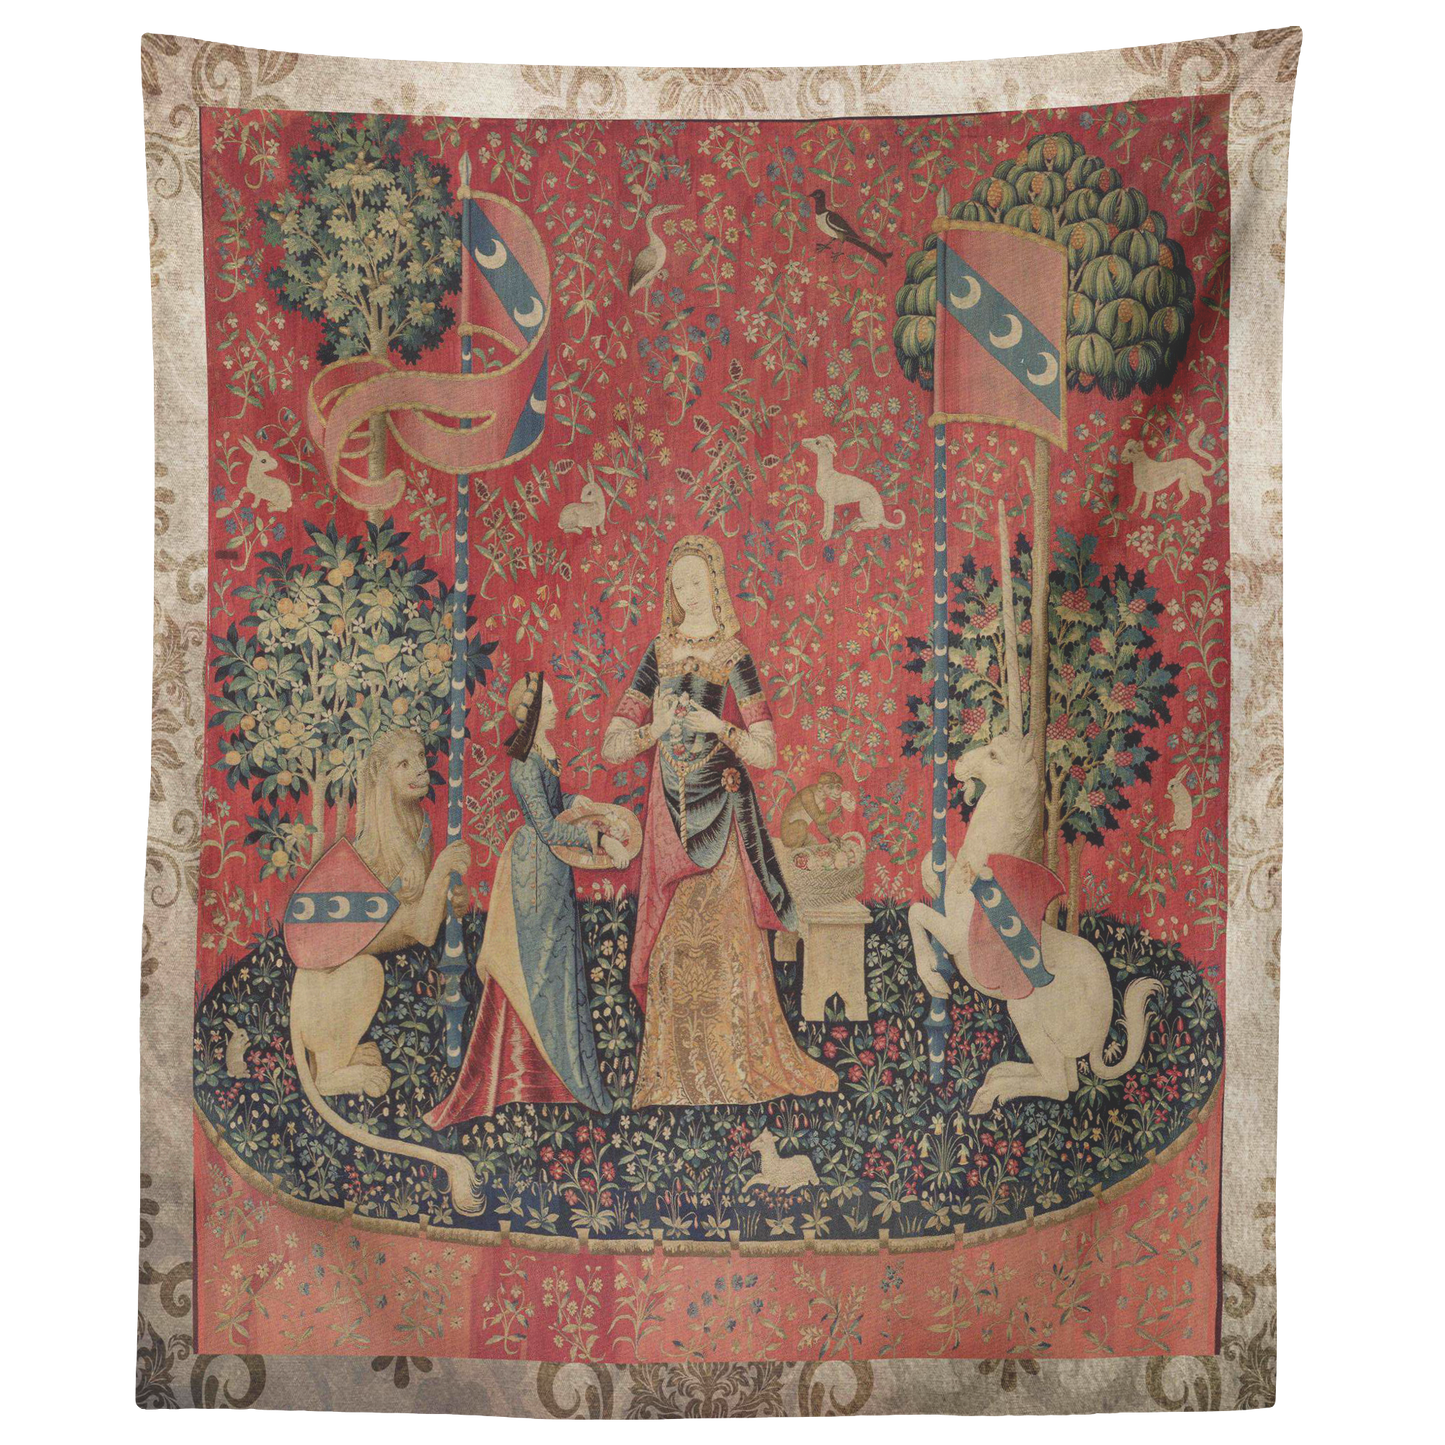 unicorn, tapestry, medieval, middle ages, renaissance, cluny museum, lion, noble lady, maid, mille fleurs, thousand flowers, flanders